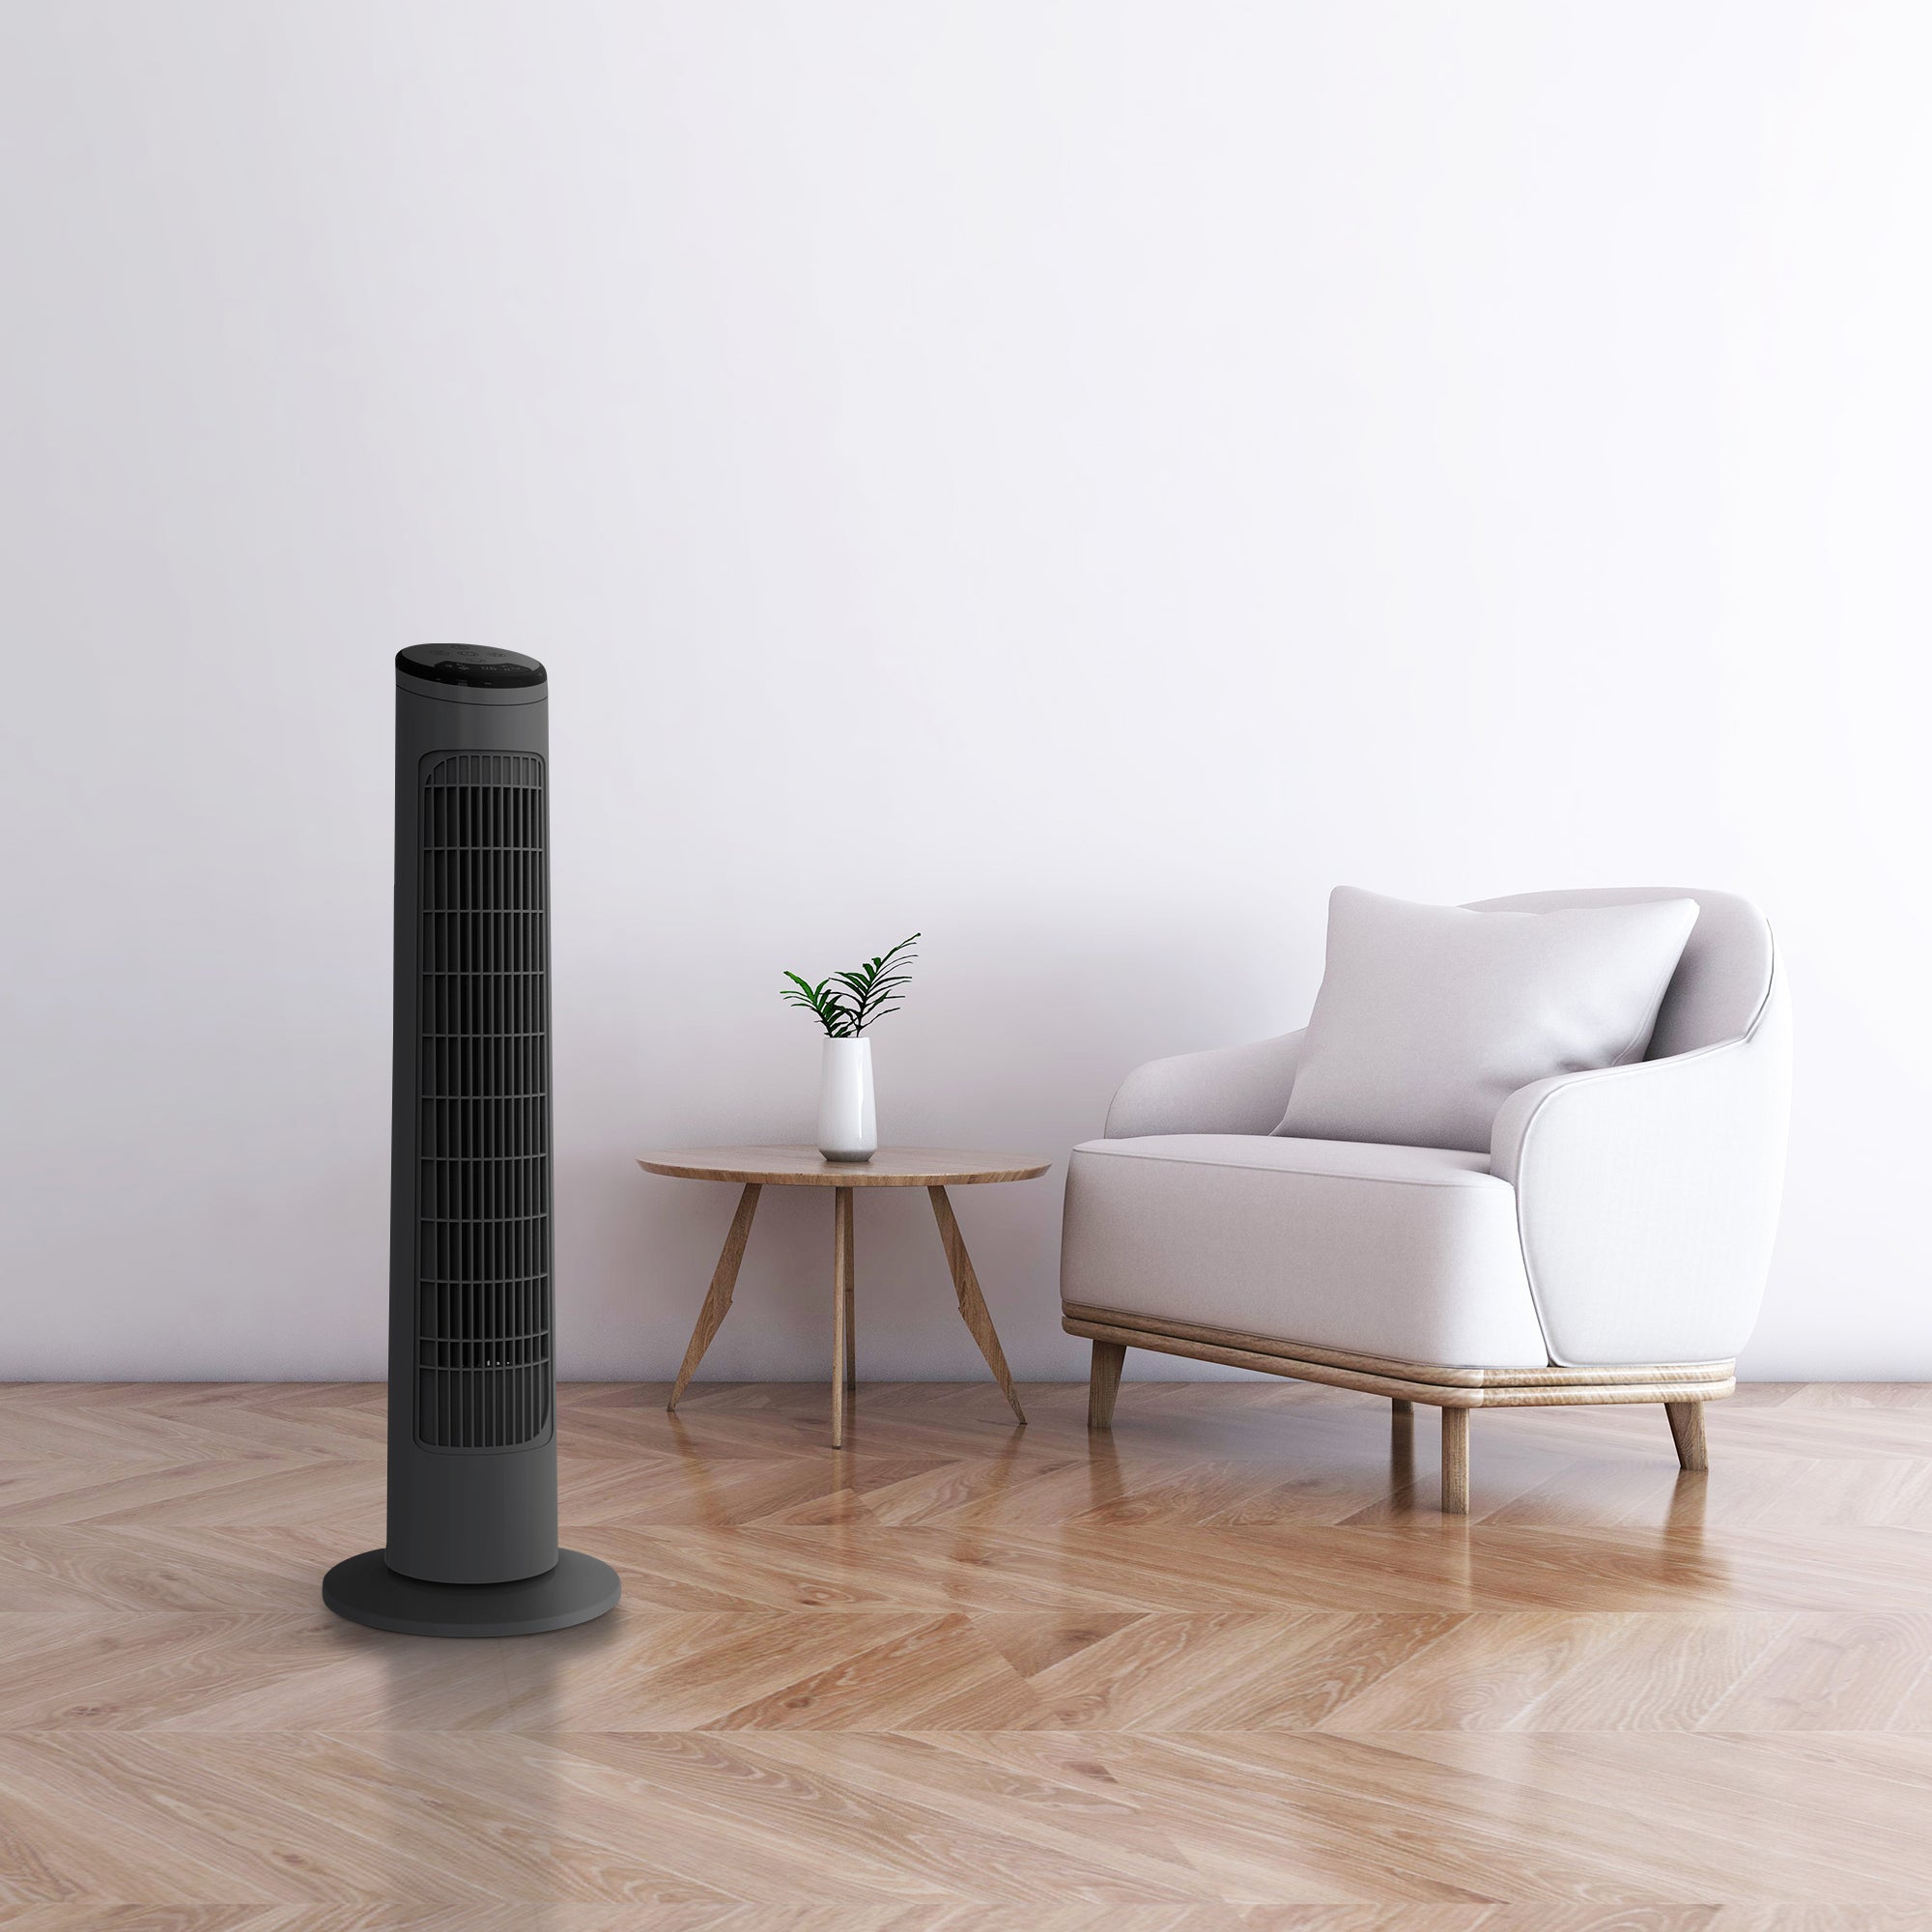 29-Inch 90 Degree Tower Fan with Remote Control - Powerful Wind, 6 Speeds and 3 Modes